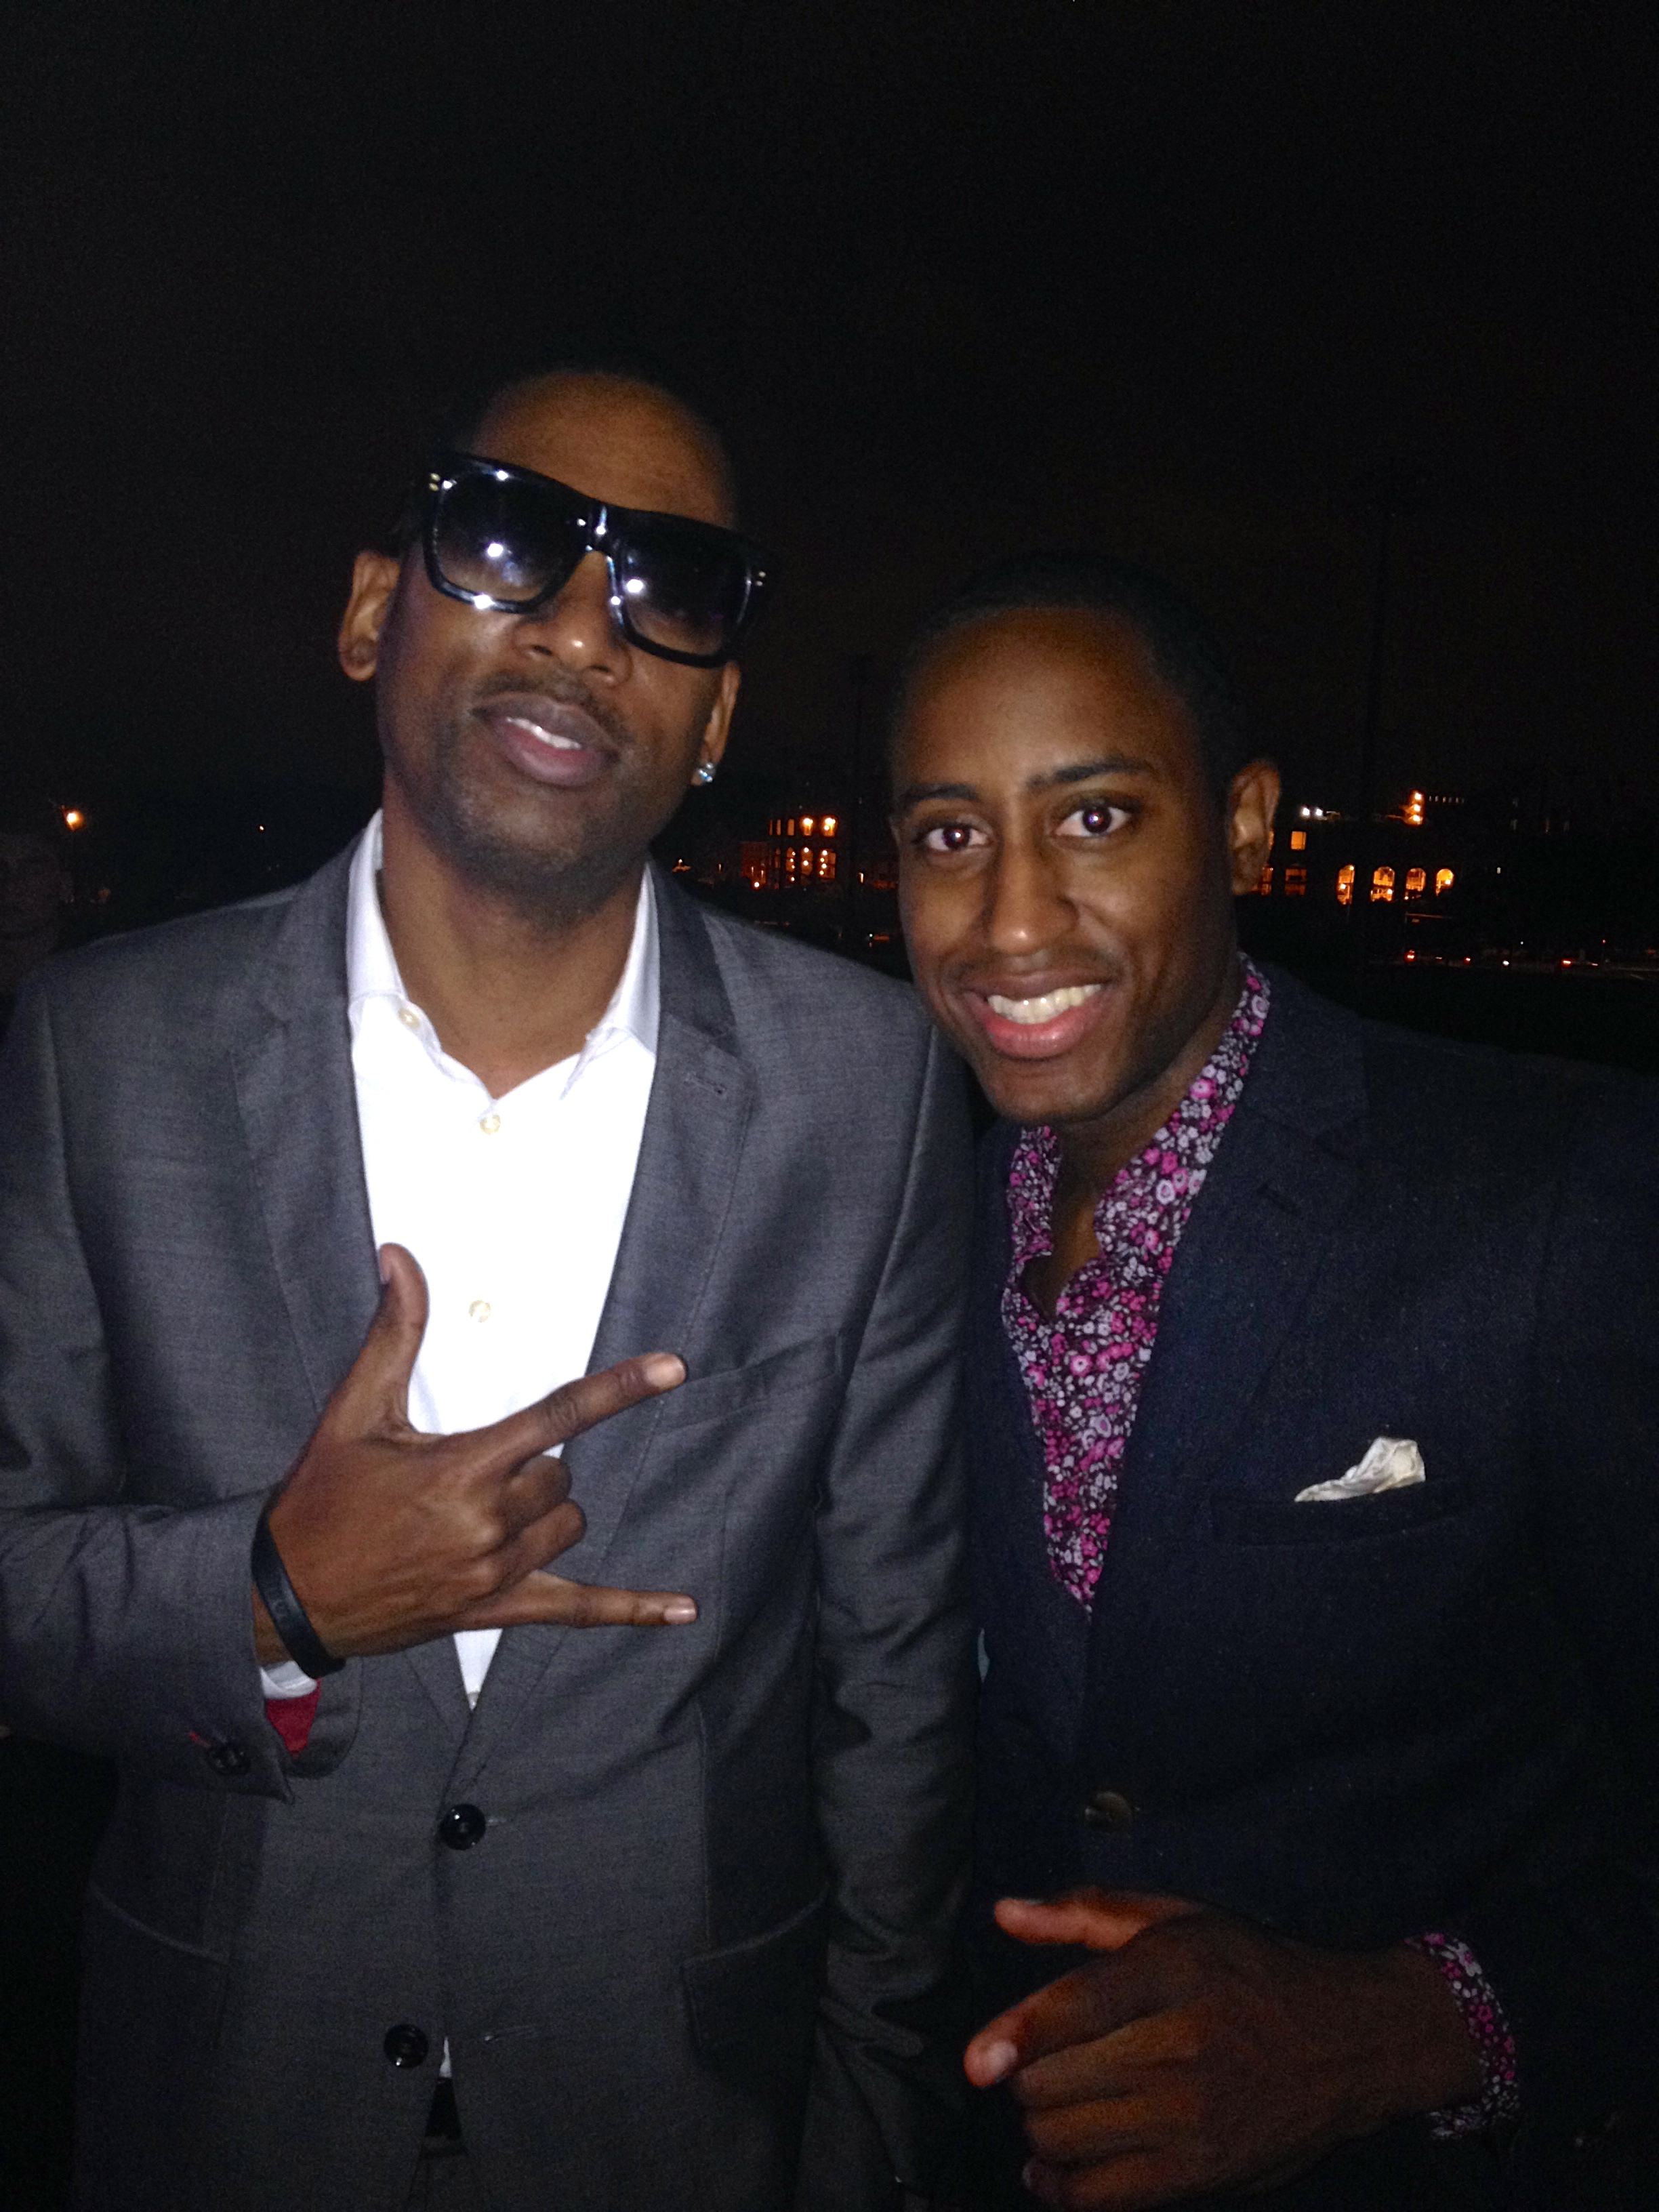 Montrel Miller and Tony Rock at Society of the Crown event for Florida A&M University's Homecoming. They were the hosts of the event. Montrel is an alumnus of the university